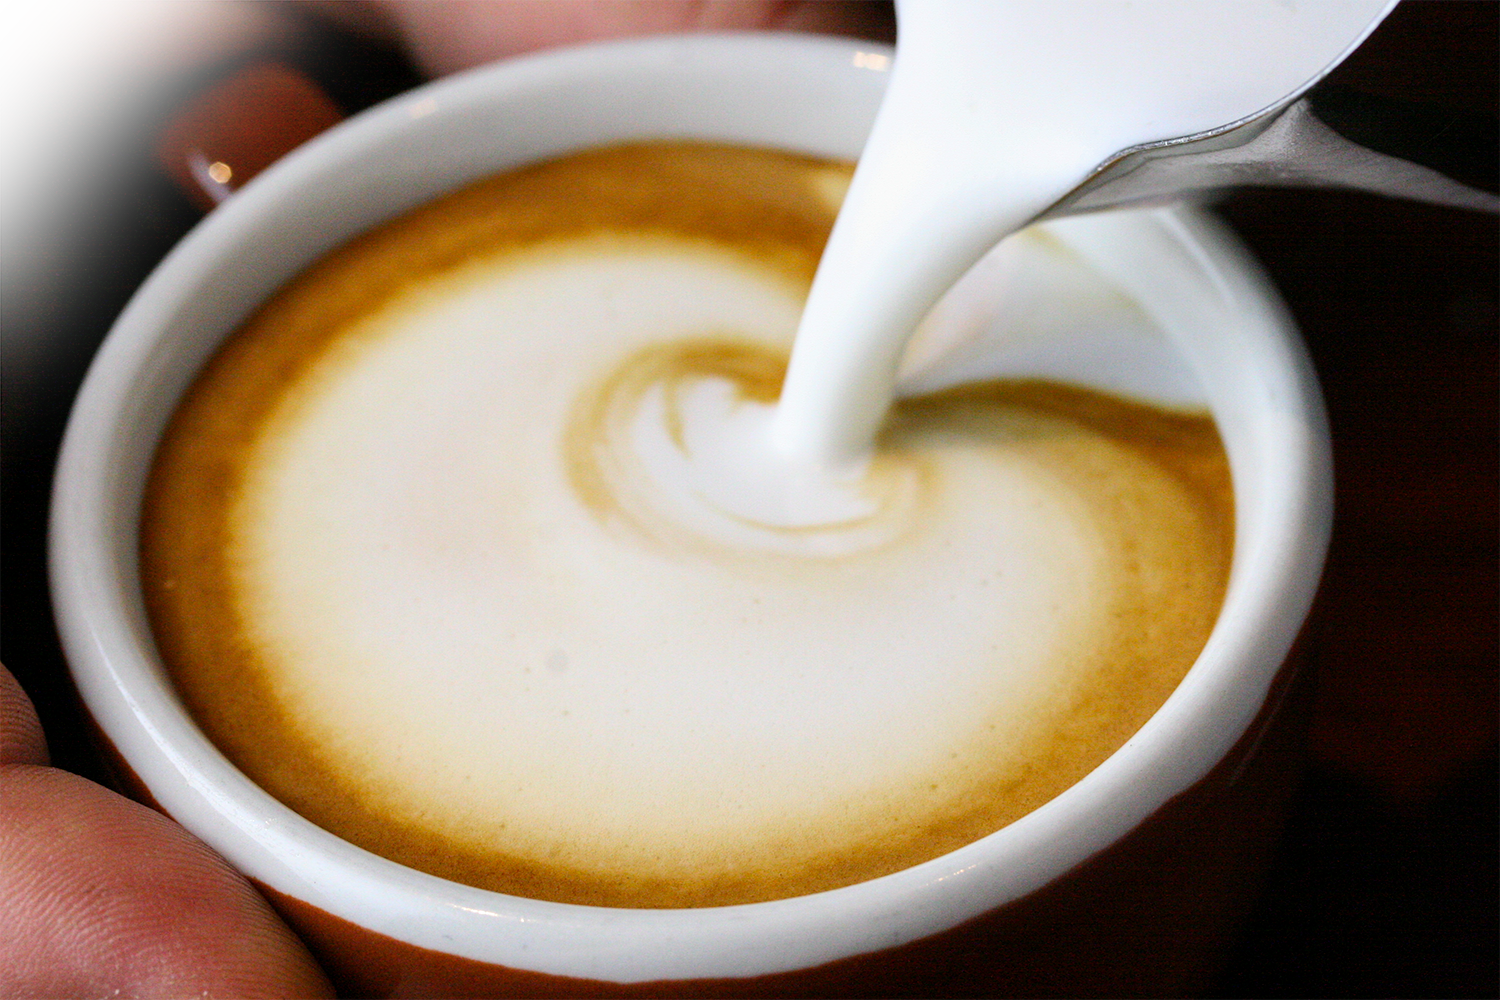 How can baristas foam milk for specialty coffee without using